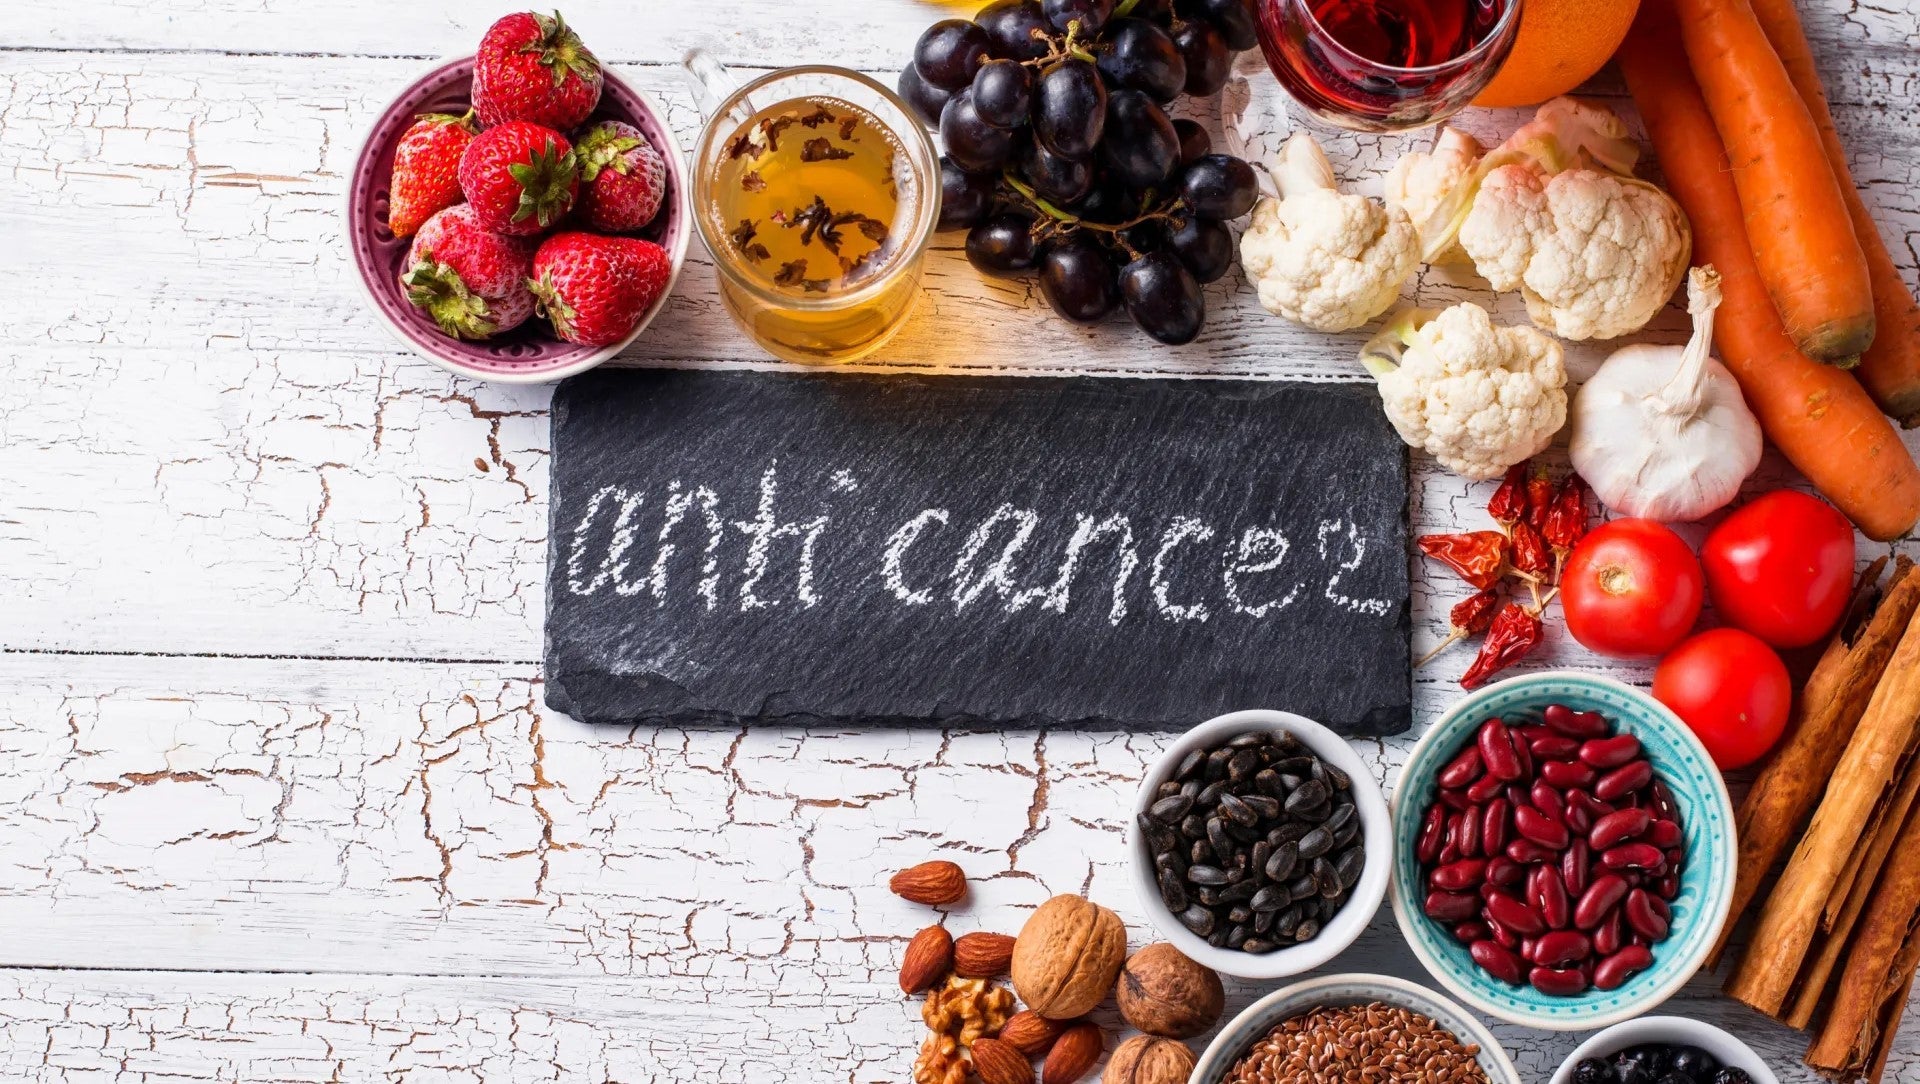 10 Cancer-Fighting Foods to Incorporate Into Family Meals - Balance7